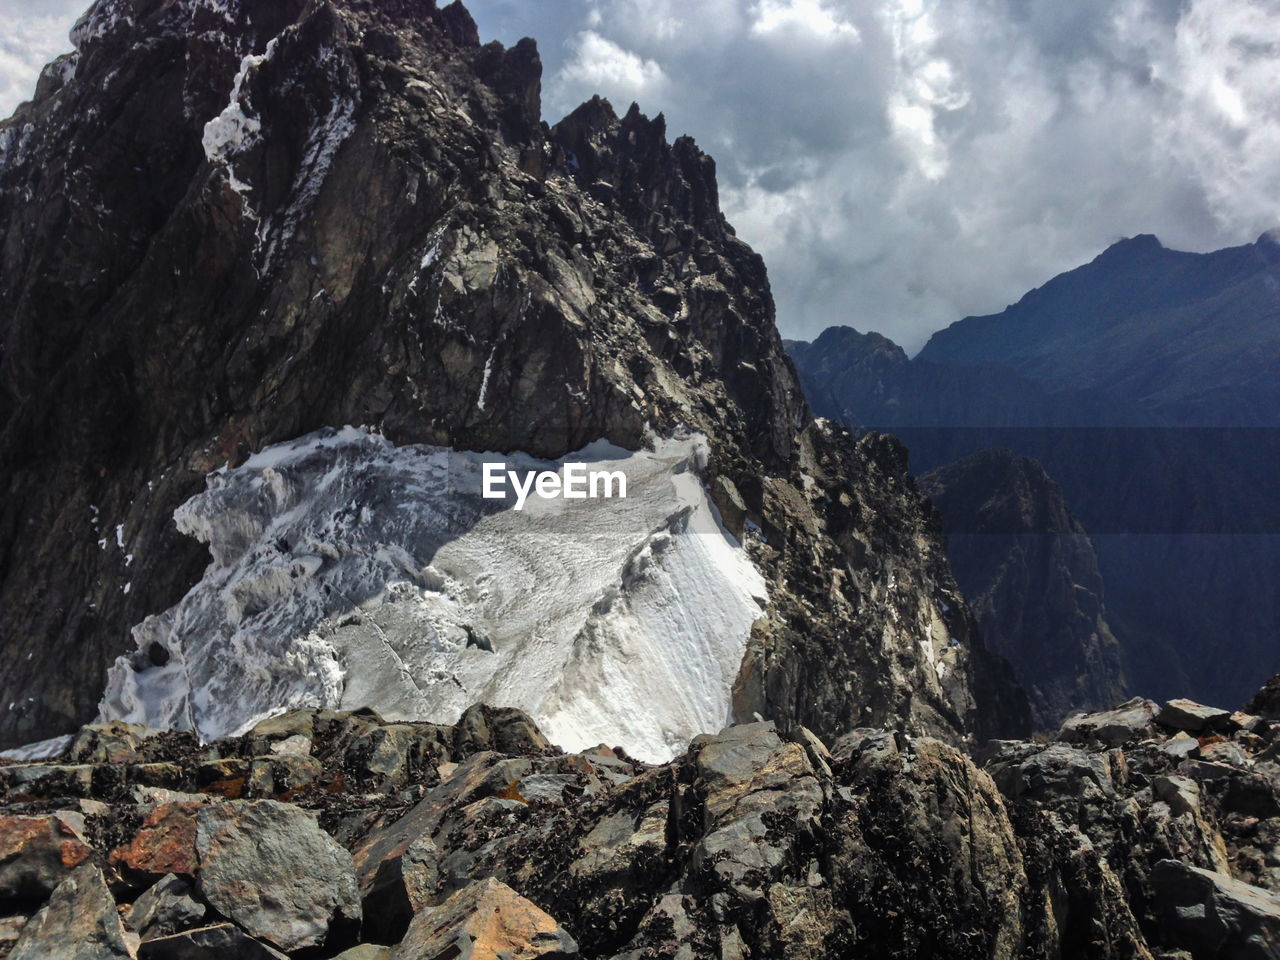 Volcanic rock formations above the clouds at rwenzori mountains national park